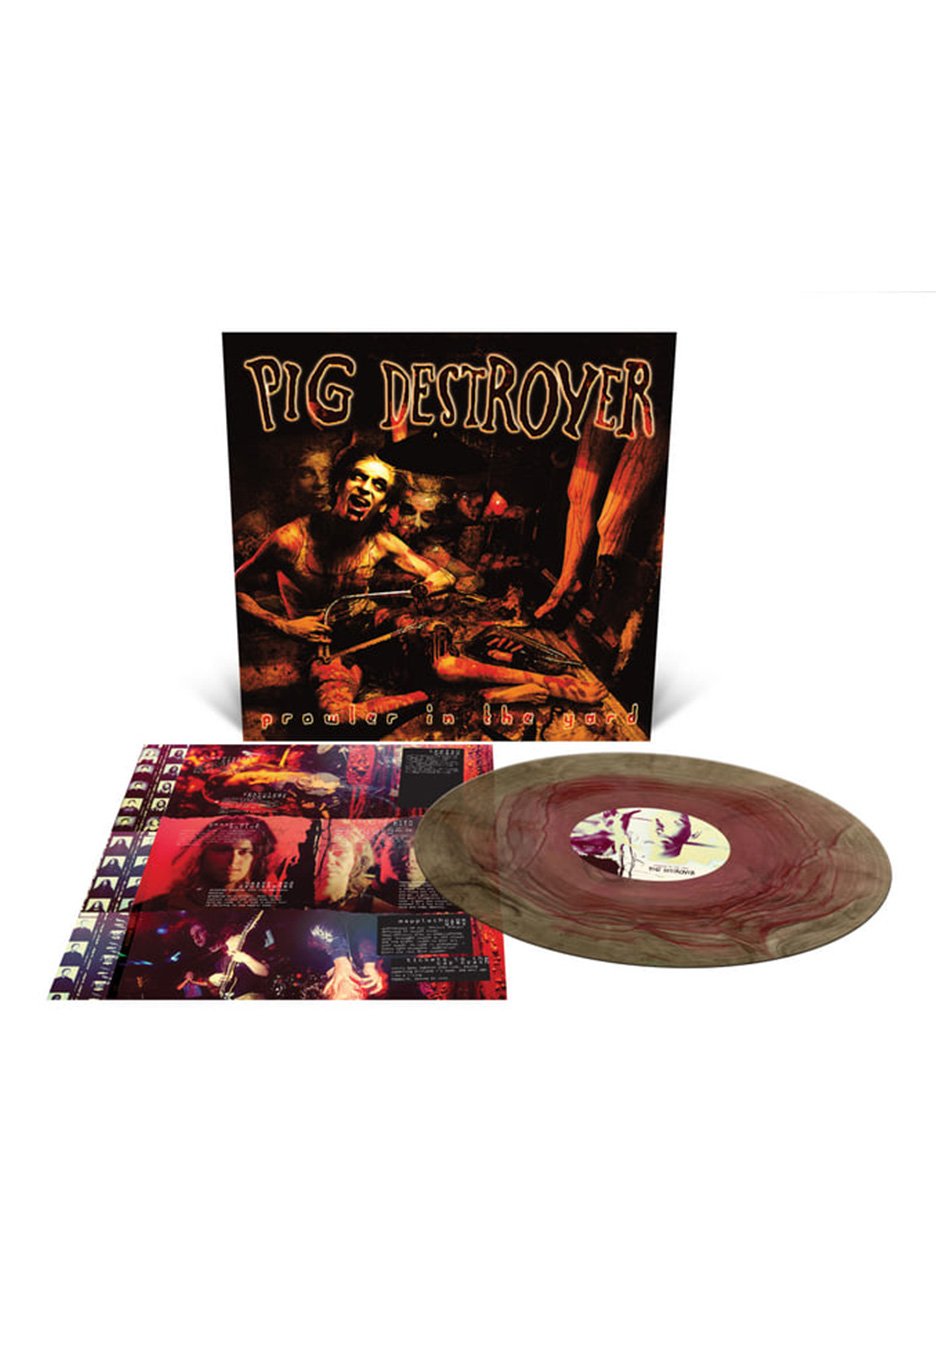 Pig Destroyer - Prowler In The Yard (Deluxe Reissue) Ltd. Oxblood/Black Ripple Effect - Colored Vinyl  | Neutral-Image